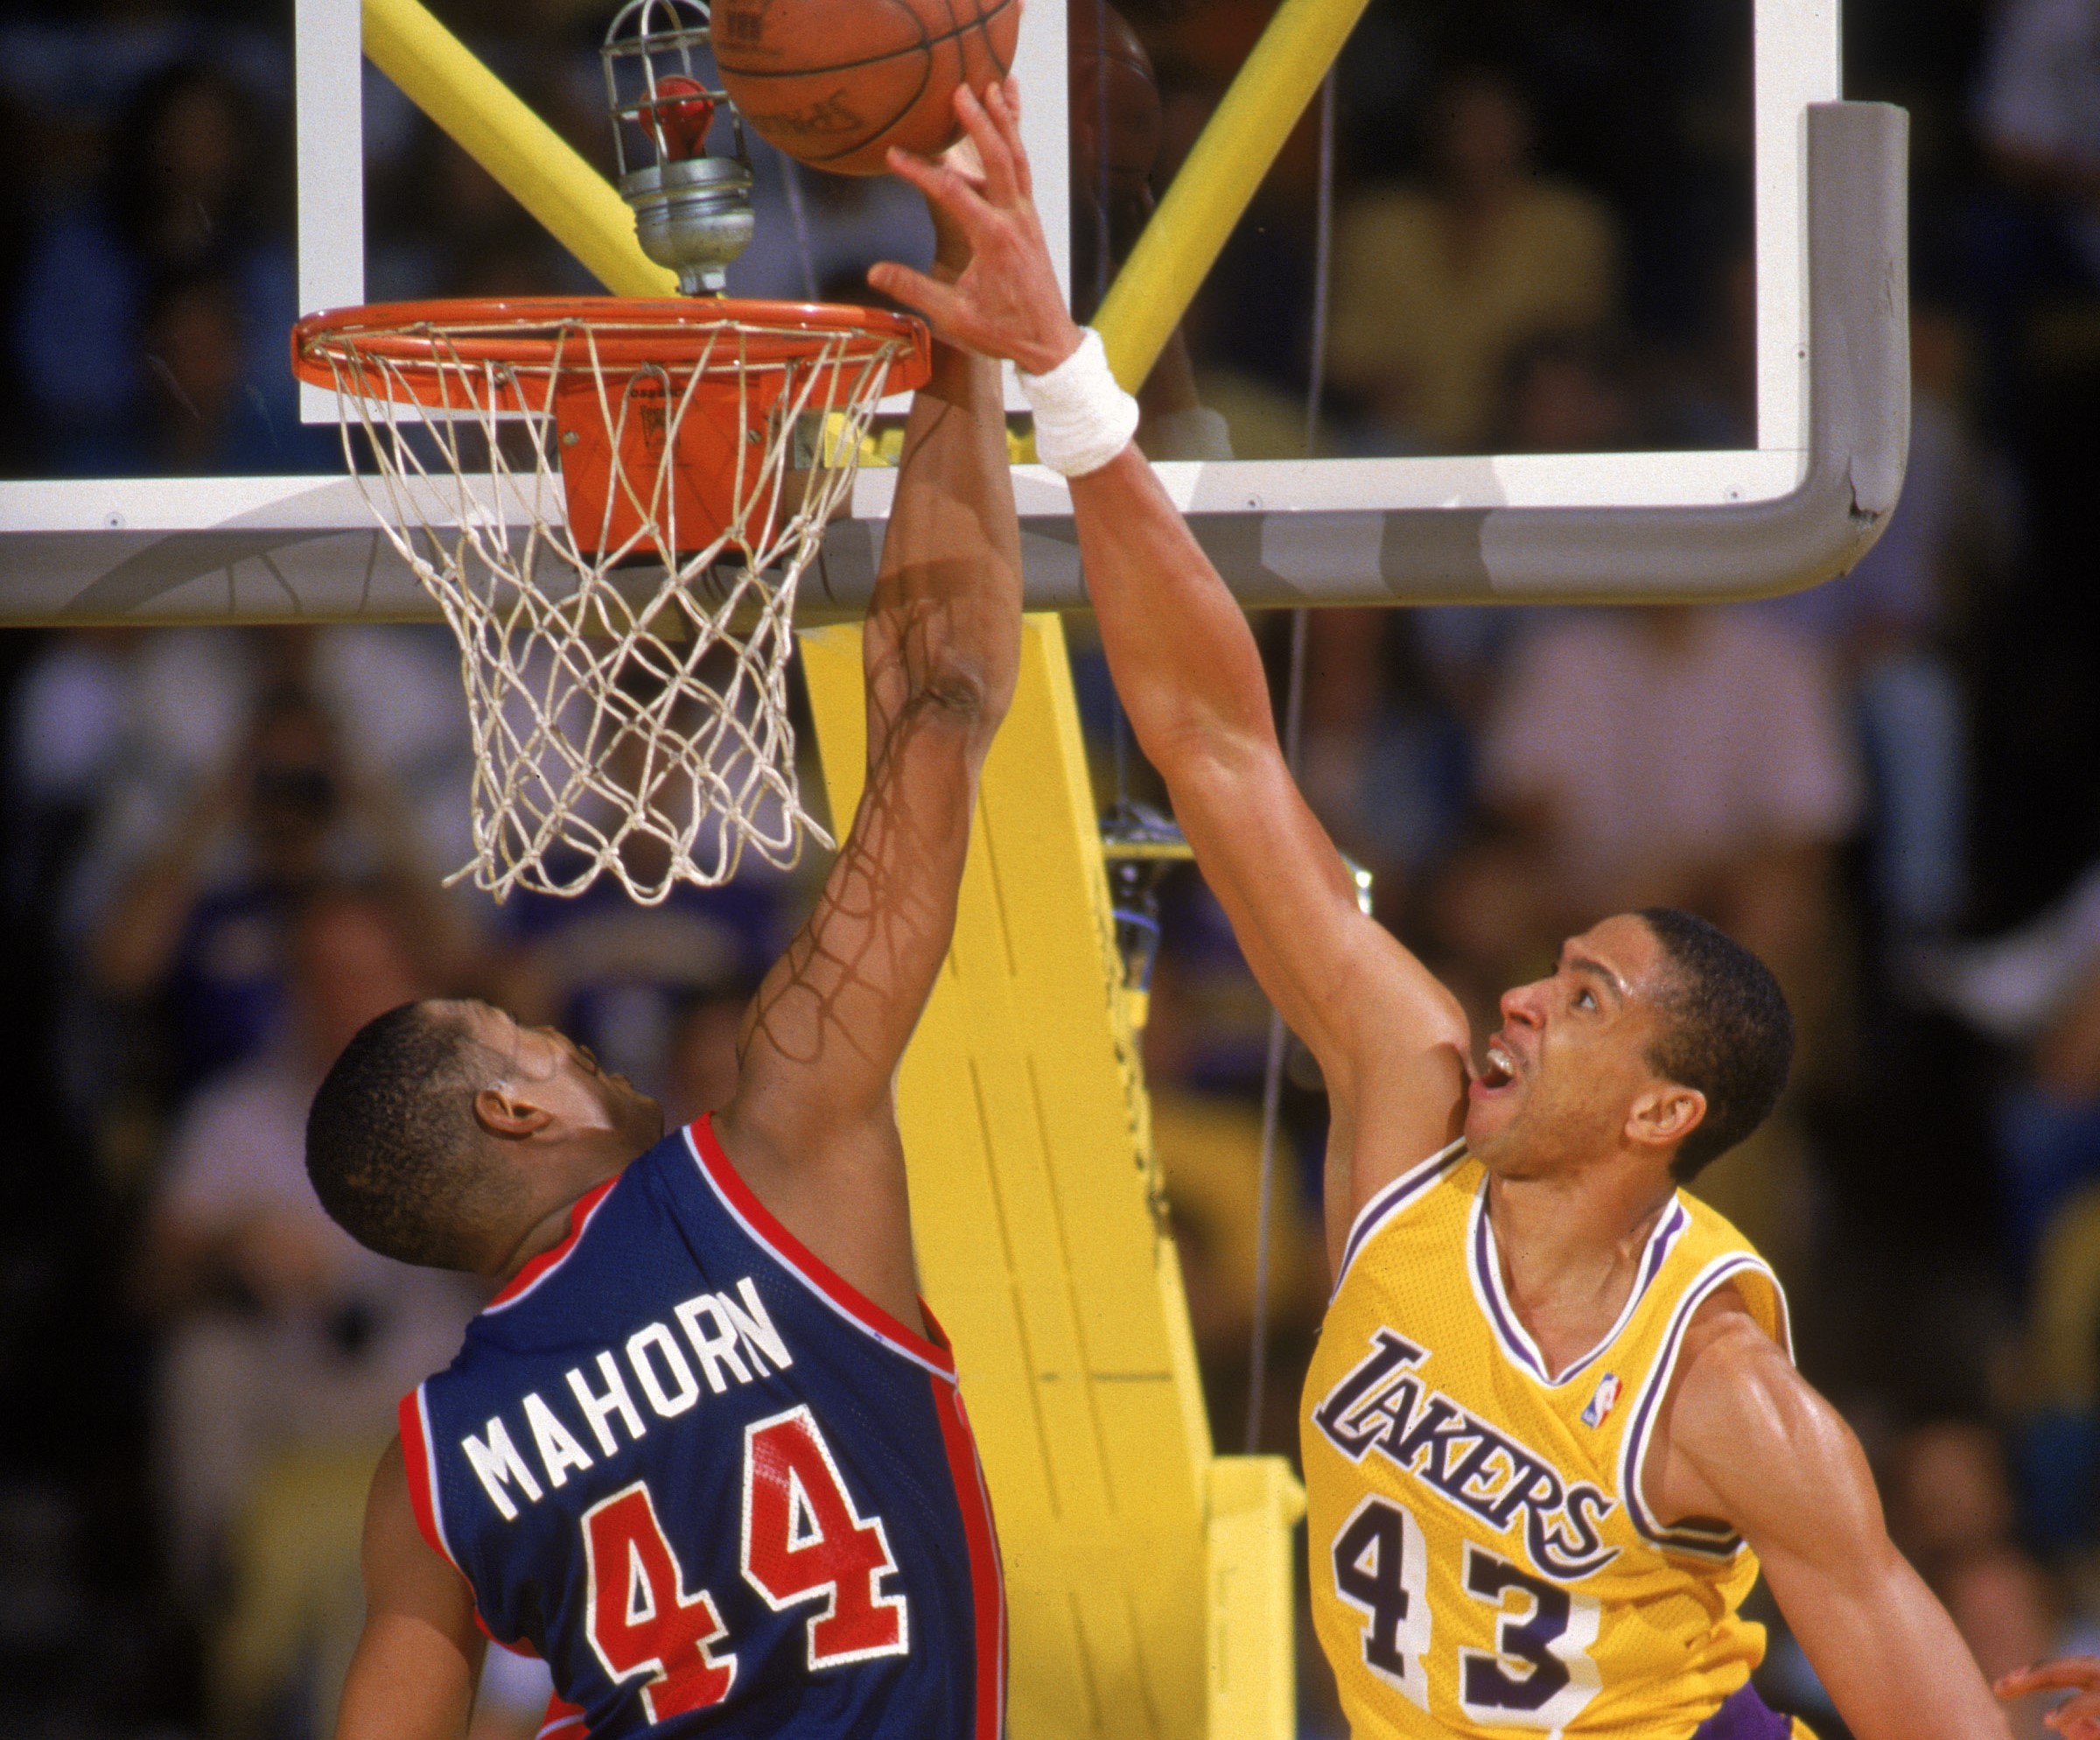 Mychal Thompson of the Los Angeles Lakers battles for a rebound with Rick Mahorn of the Detroit Pistons.